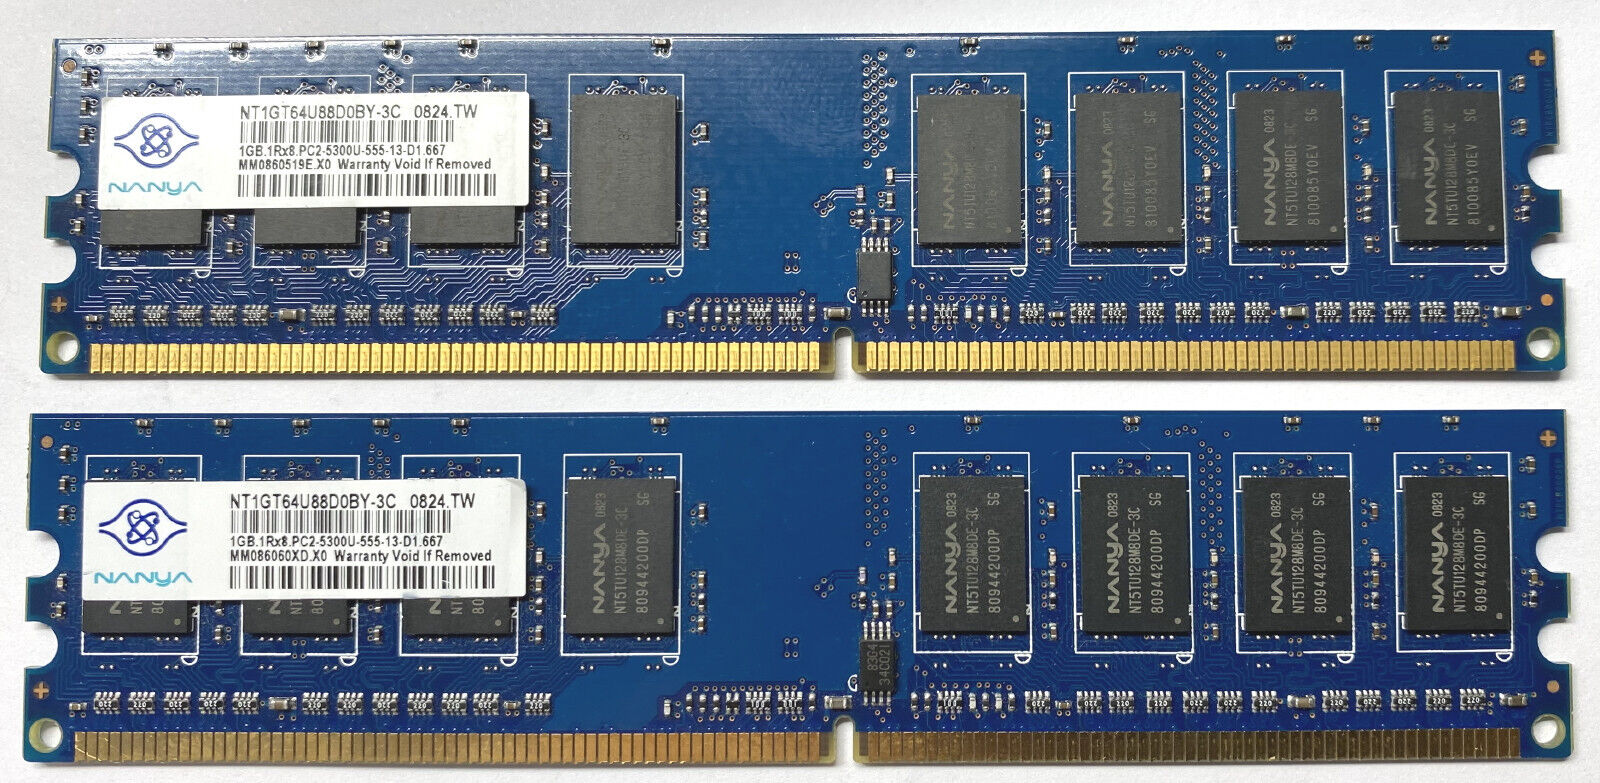 2 pcs of = 2GB = NANYA 1GB 1Rx8 PC2-5300U Desktop Ram NT1GT64U88D0BY-3C